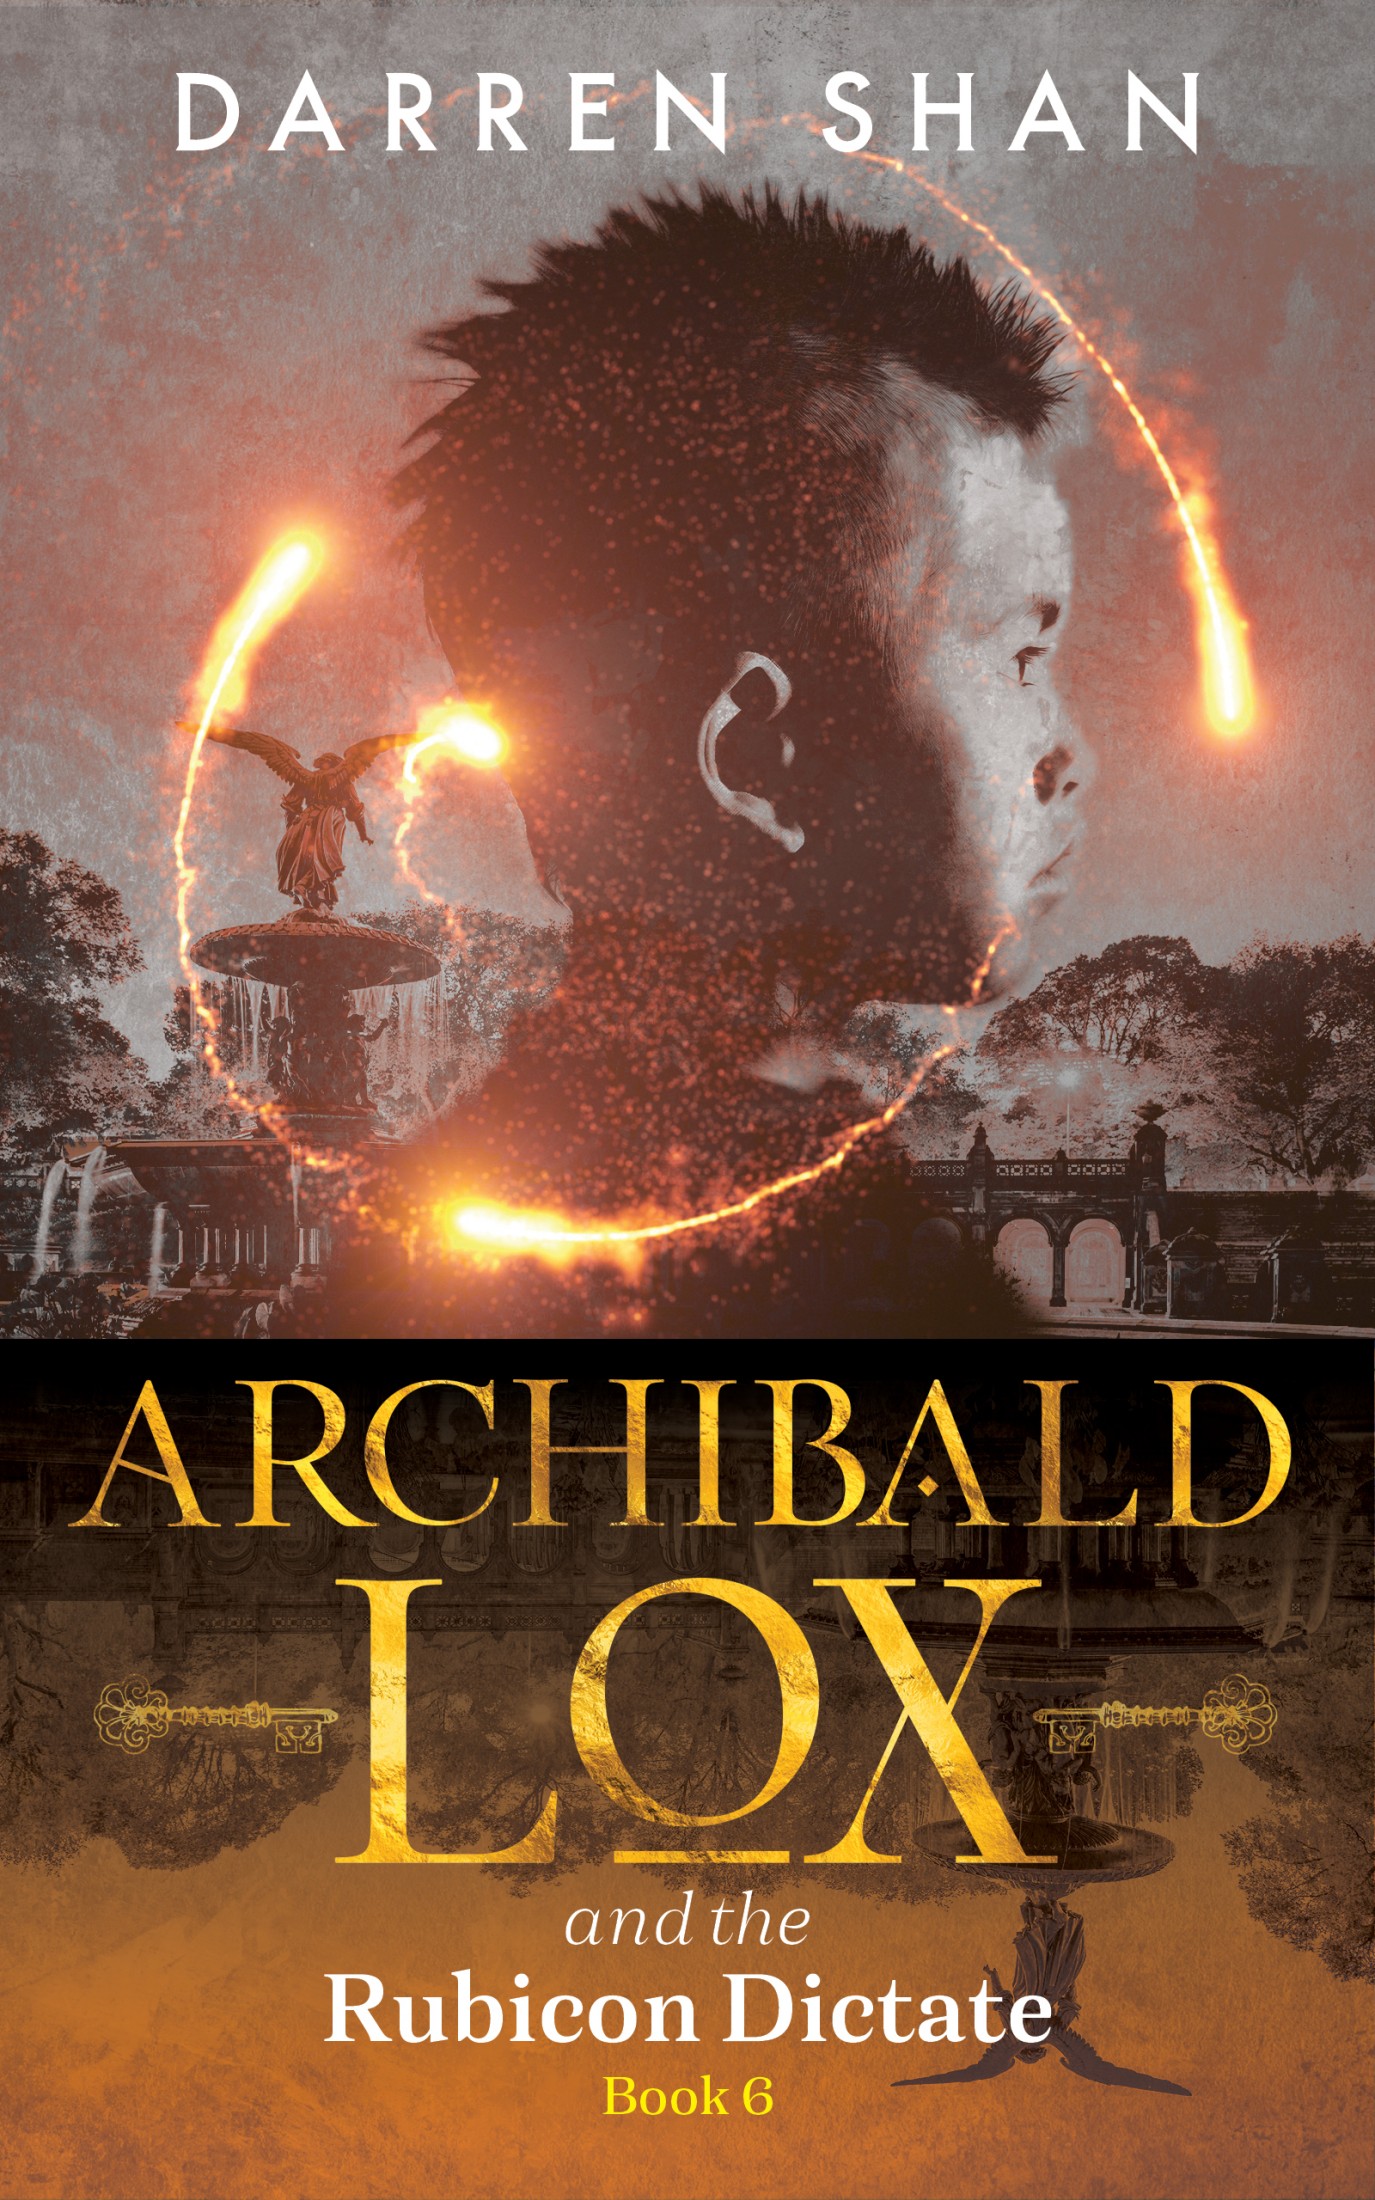 Archibald Lox and the Rubicon Dictate